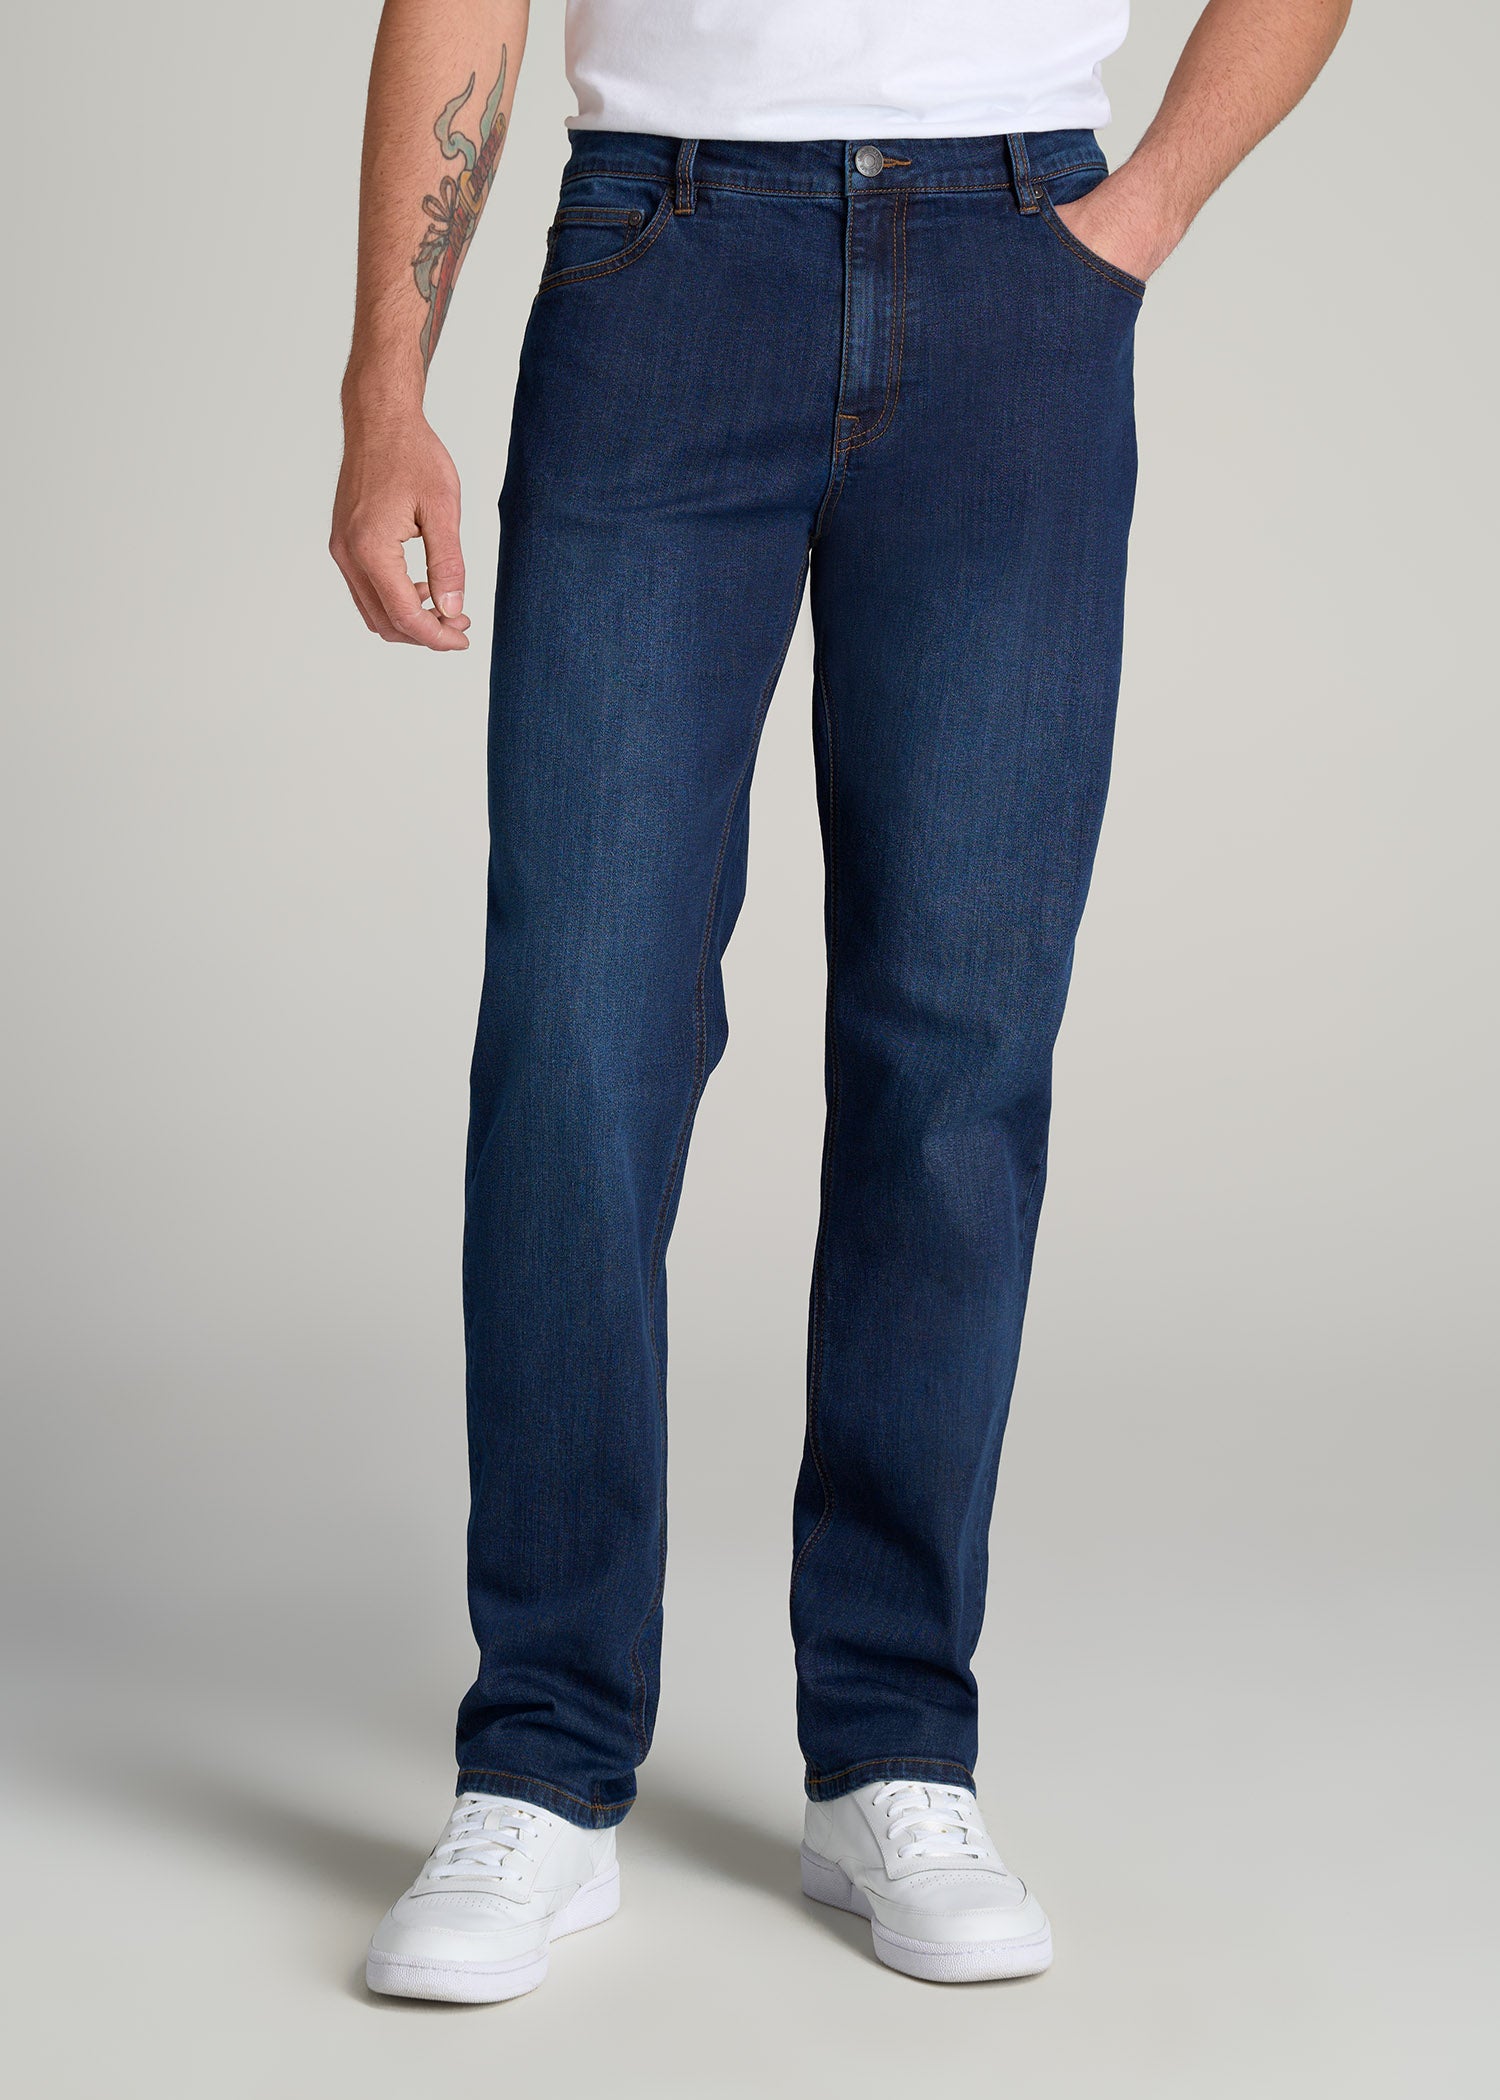 LJ&S Men's Tall Jeans Straight Leg Charger Blue | American Tall